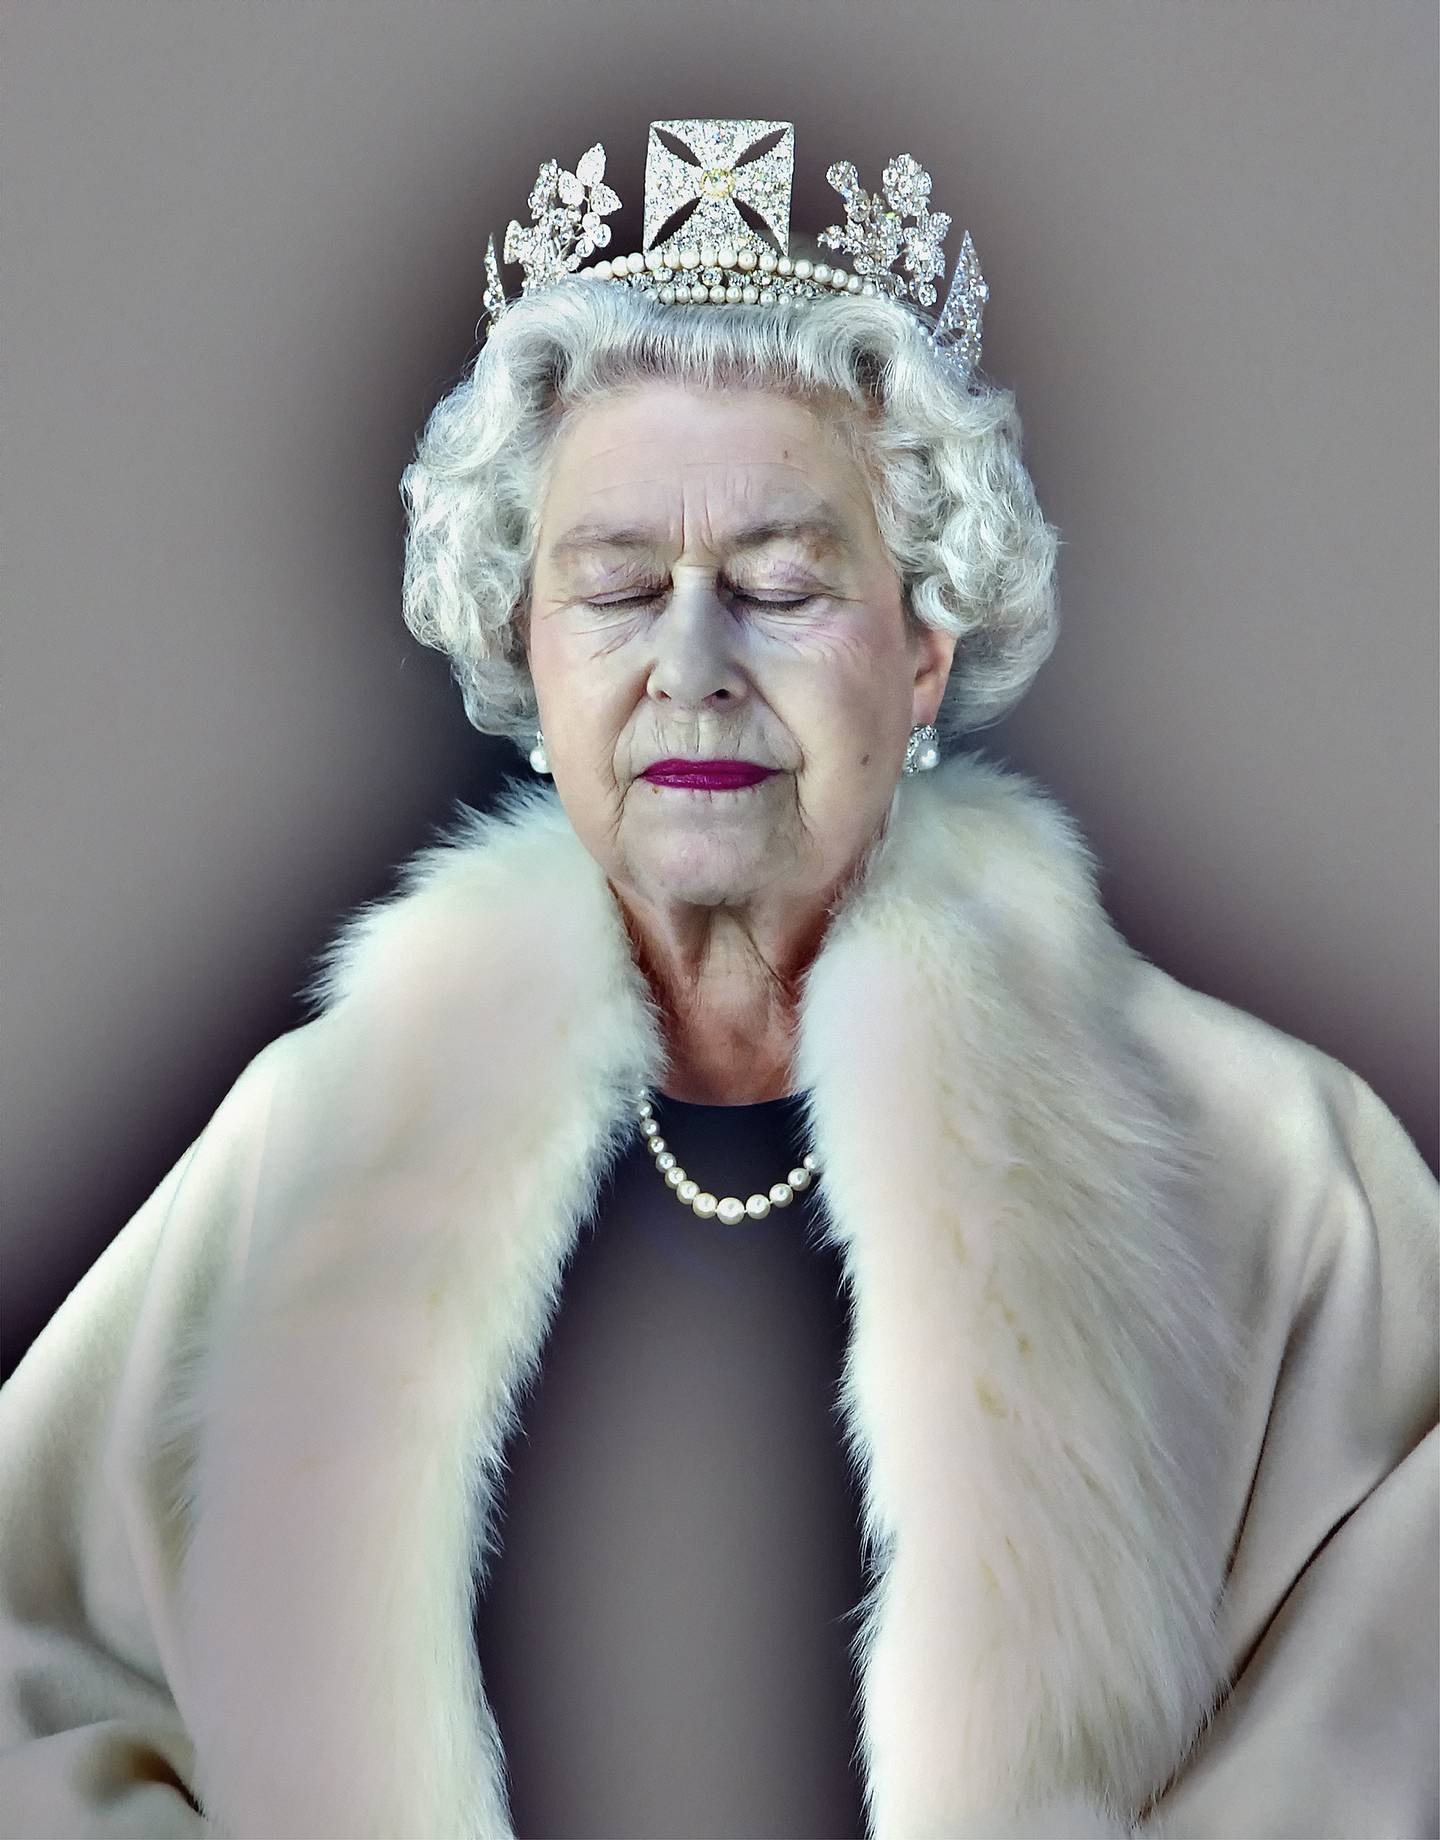 Lightness of Being, a new work of Queen Elizabeth II, donated by Chris Levine, will be sold at British Art: The Jubilee Auction with the proceeds benefiting the Platinum Jubilee Pageant. 

